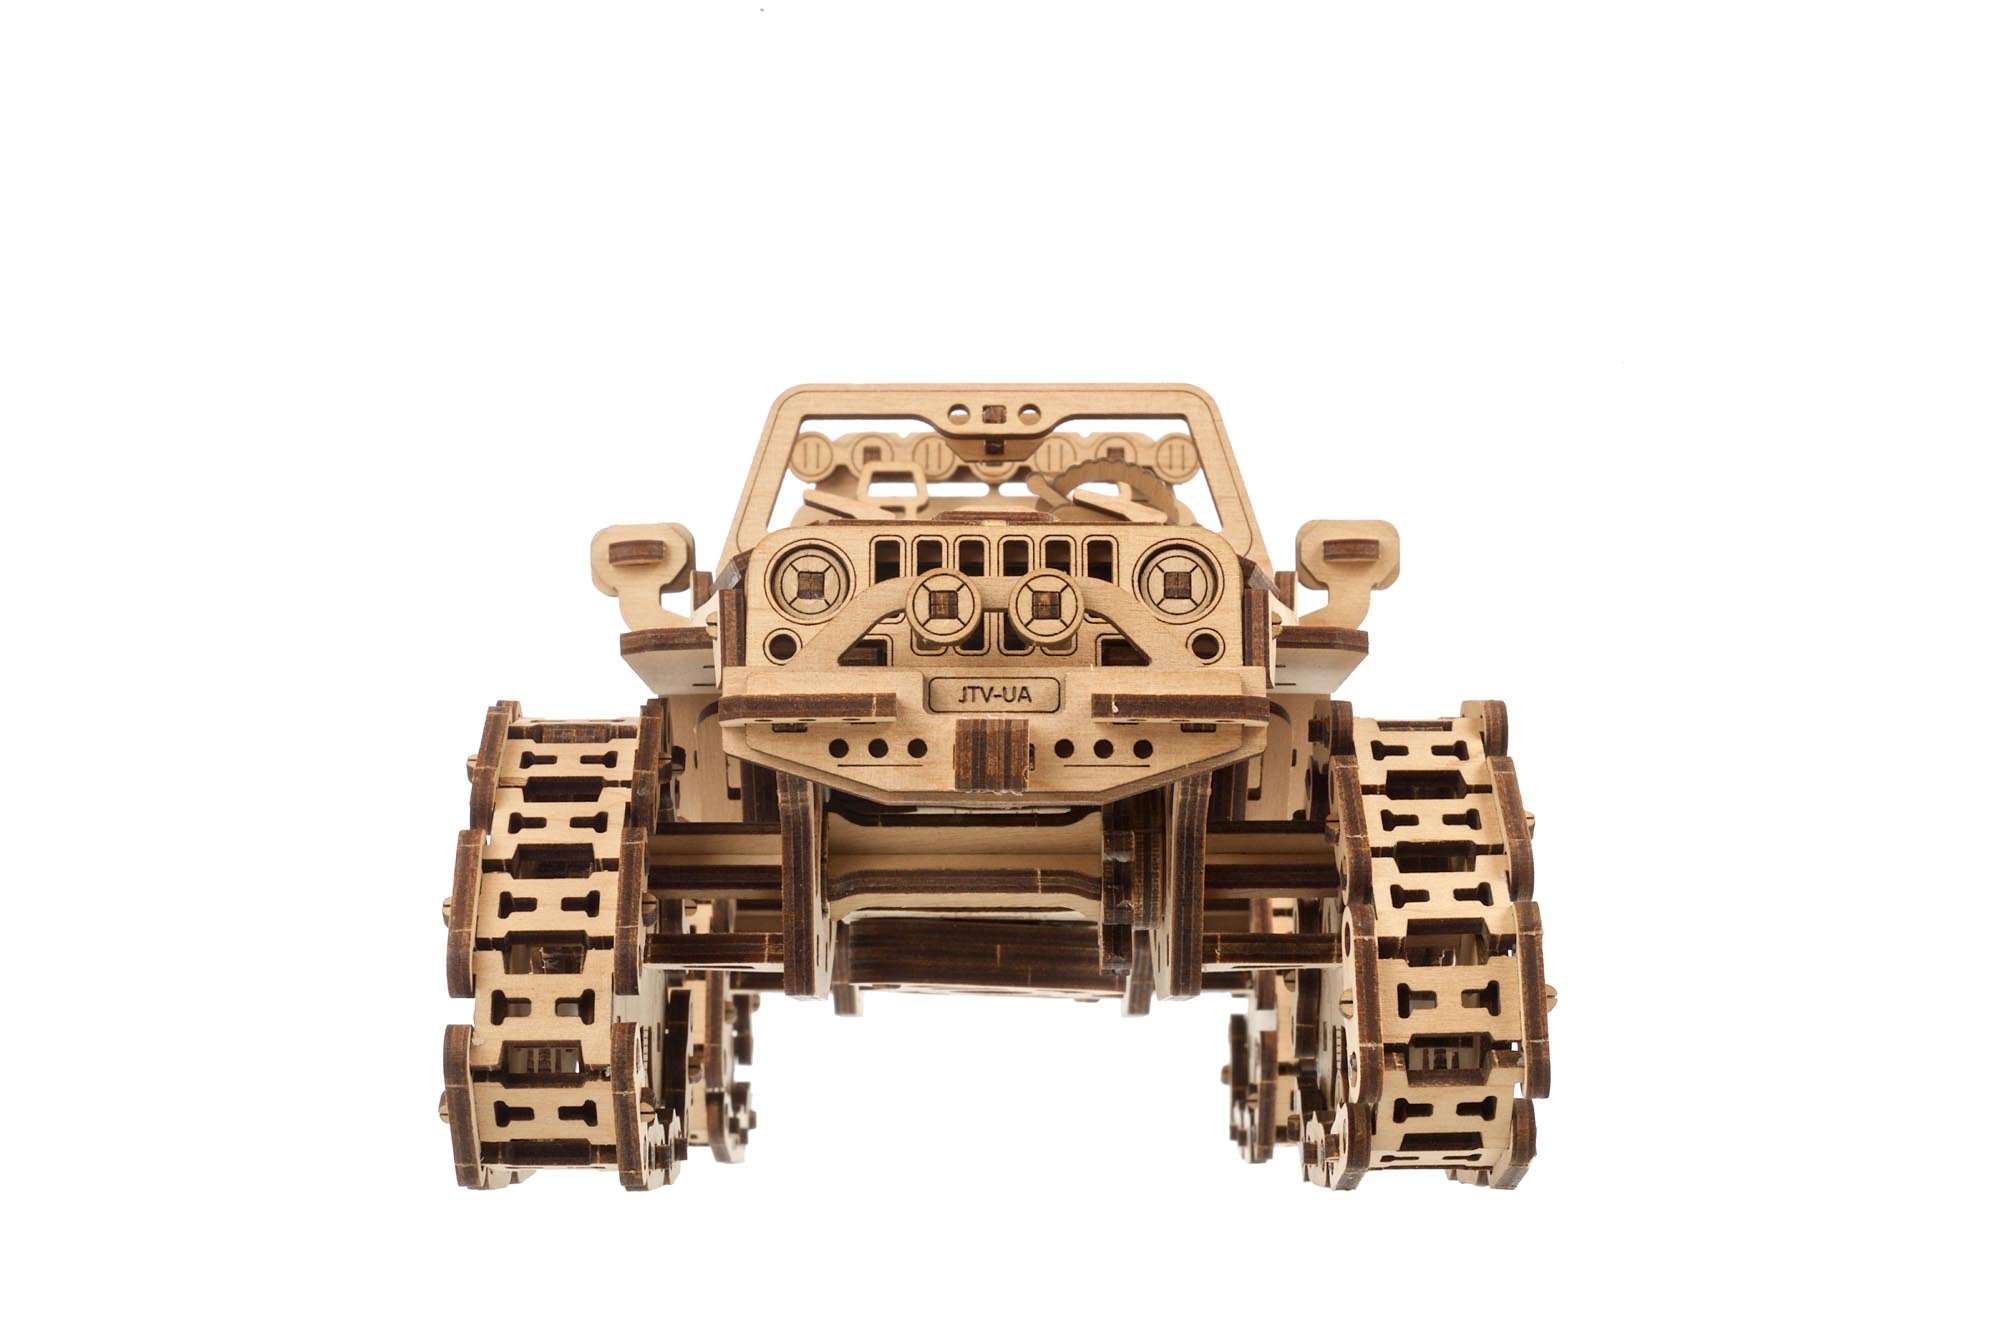 Ugears DIY 3D model kit Tracked Off-Road Vehicle